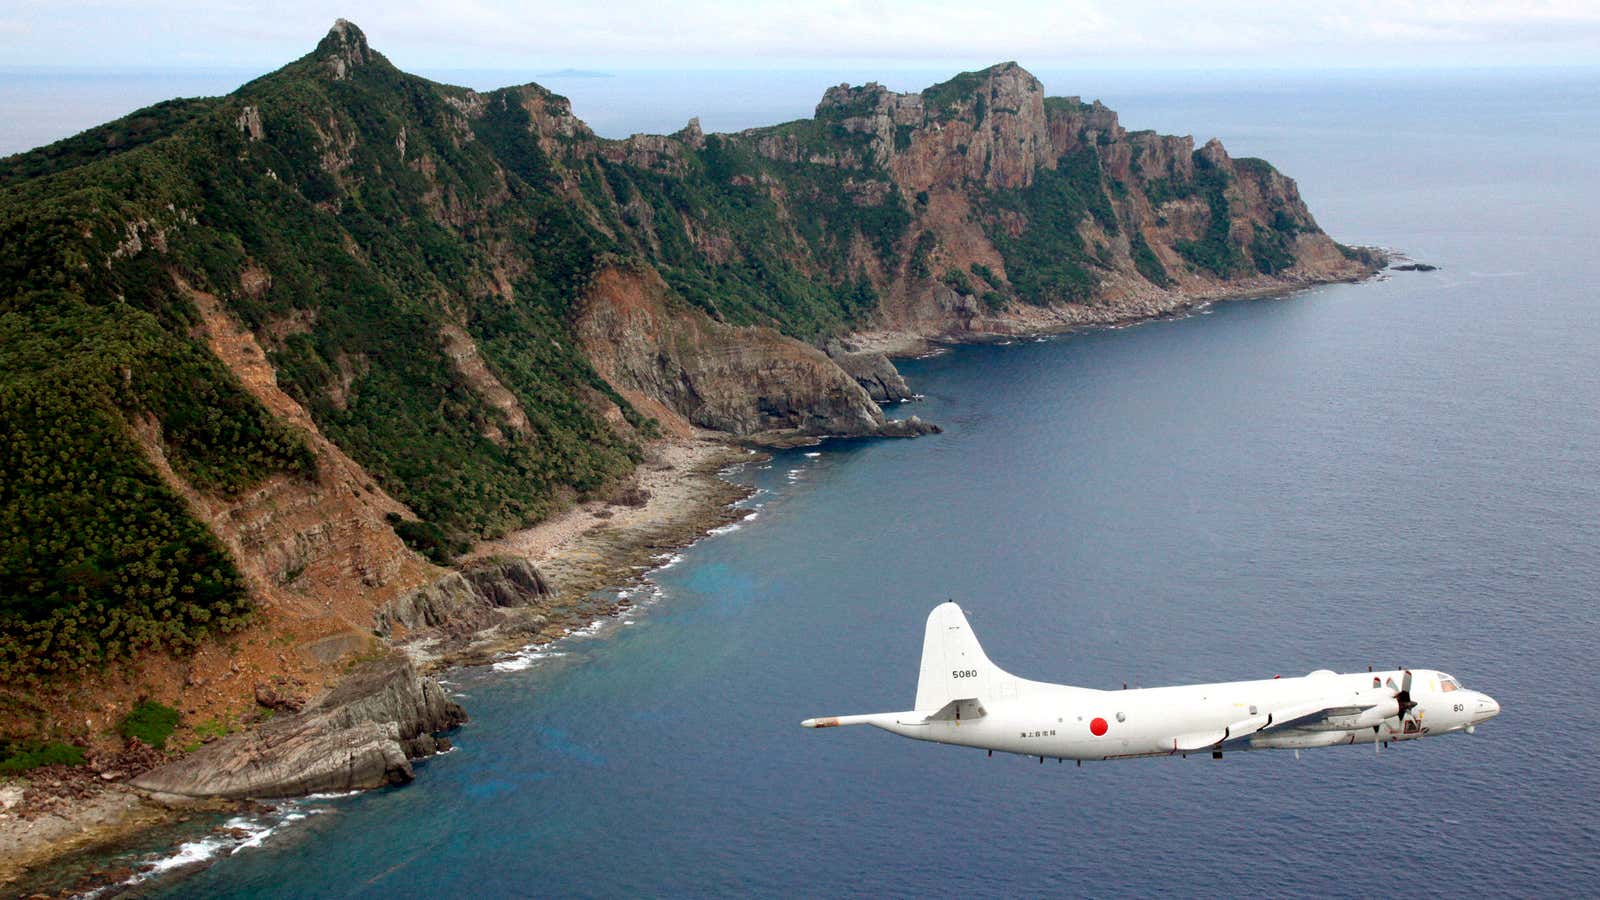 China wants Japanese planes like these to check in. Japan says they won’t.